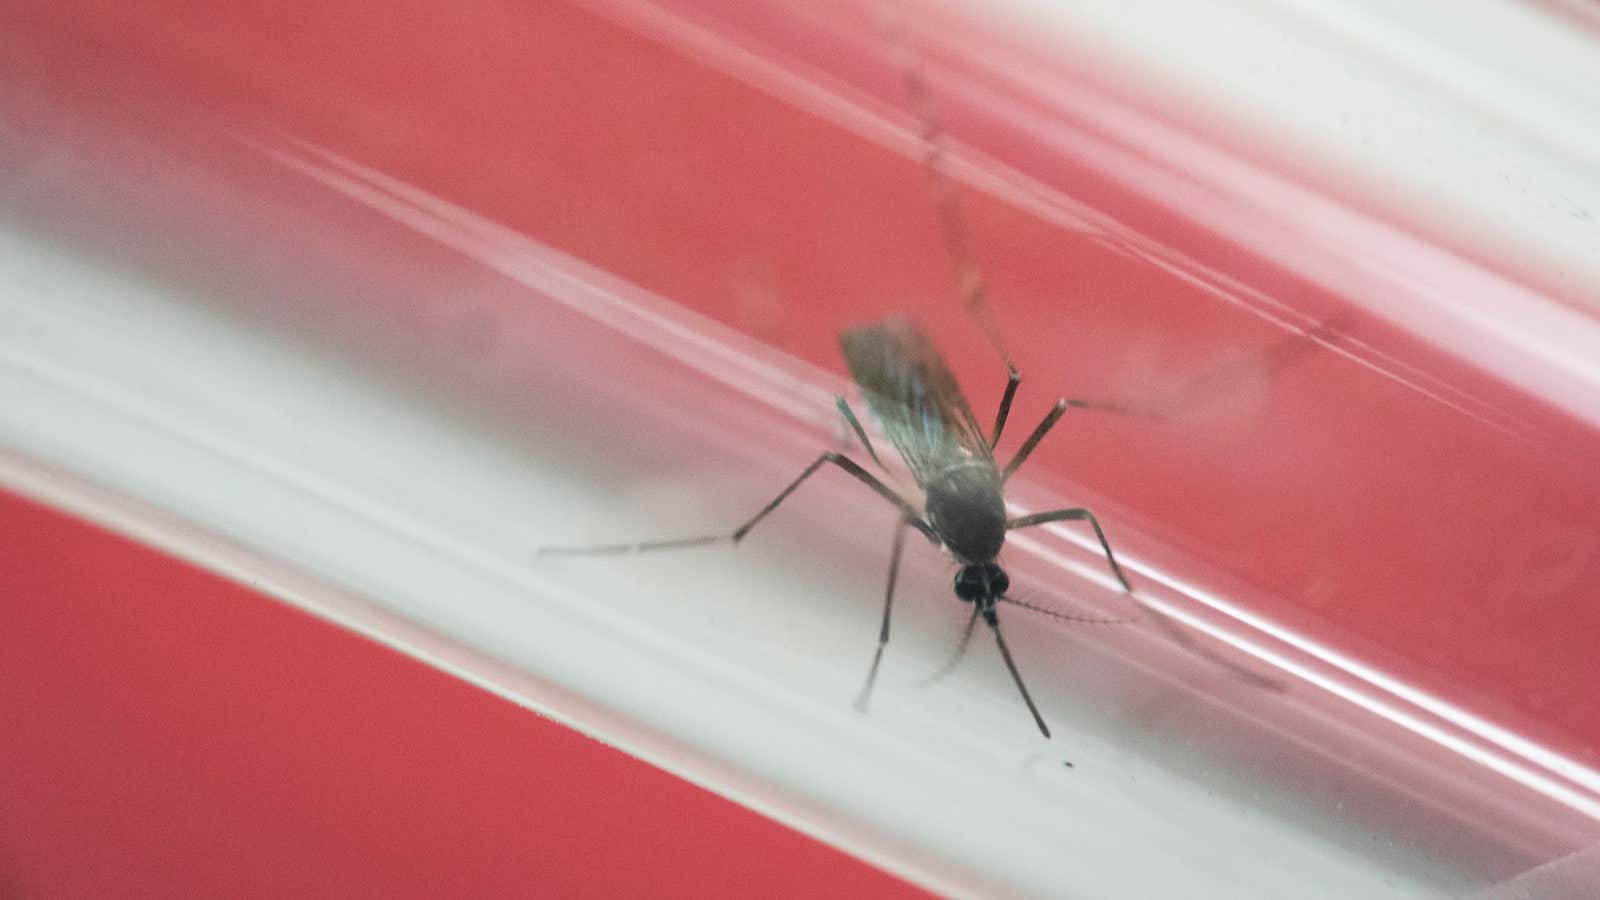 More than 800 cases of Zika, a mosquito-borne virus, have been reported in the US.